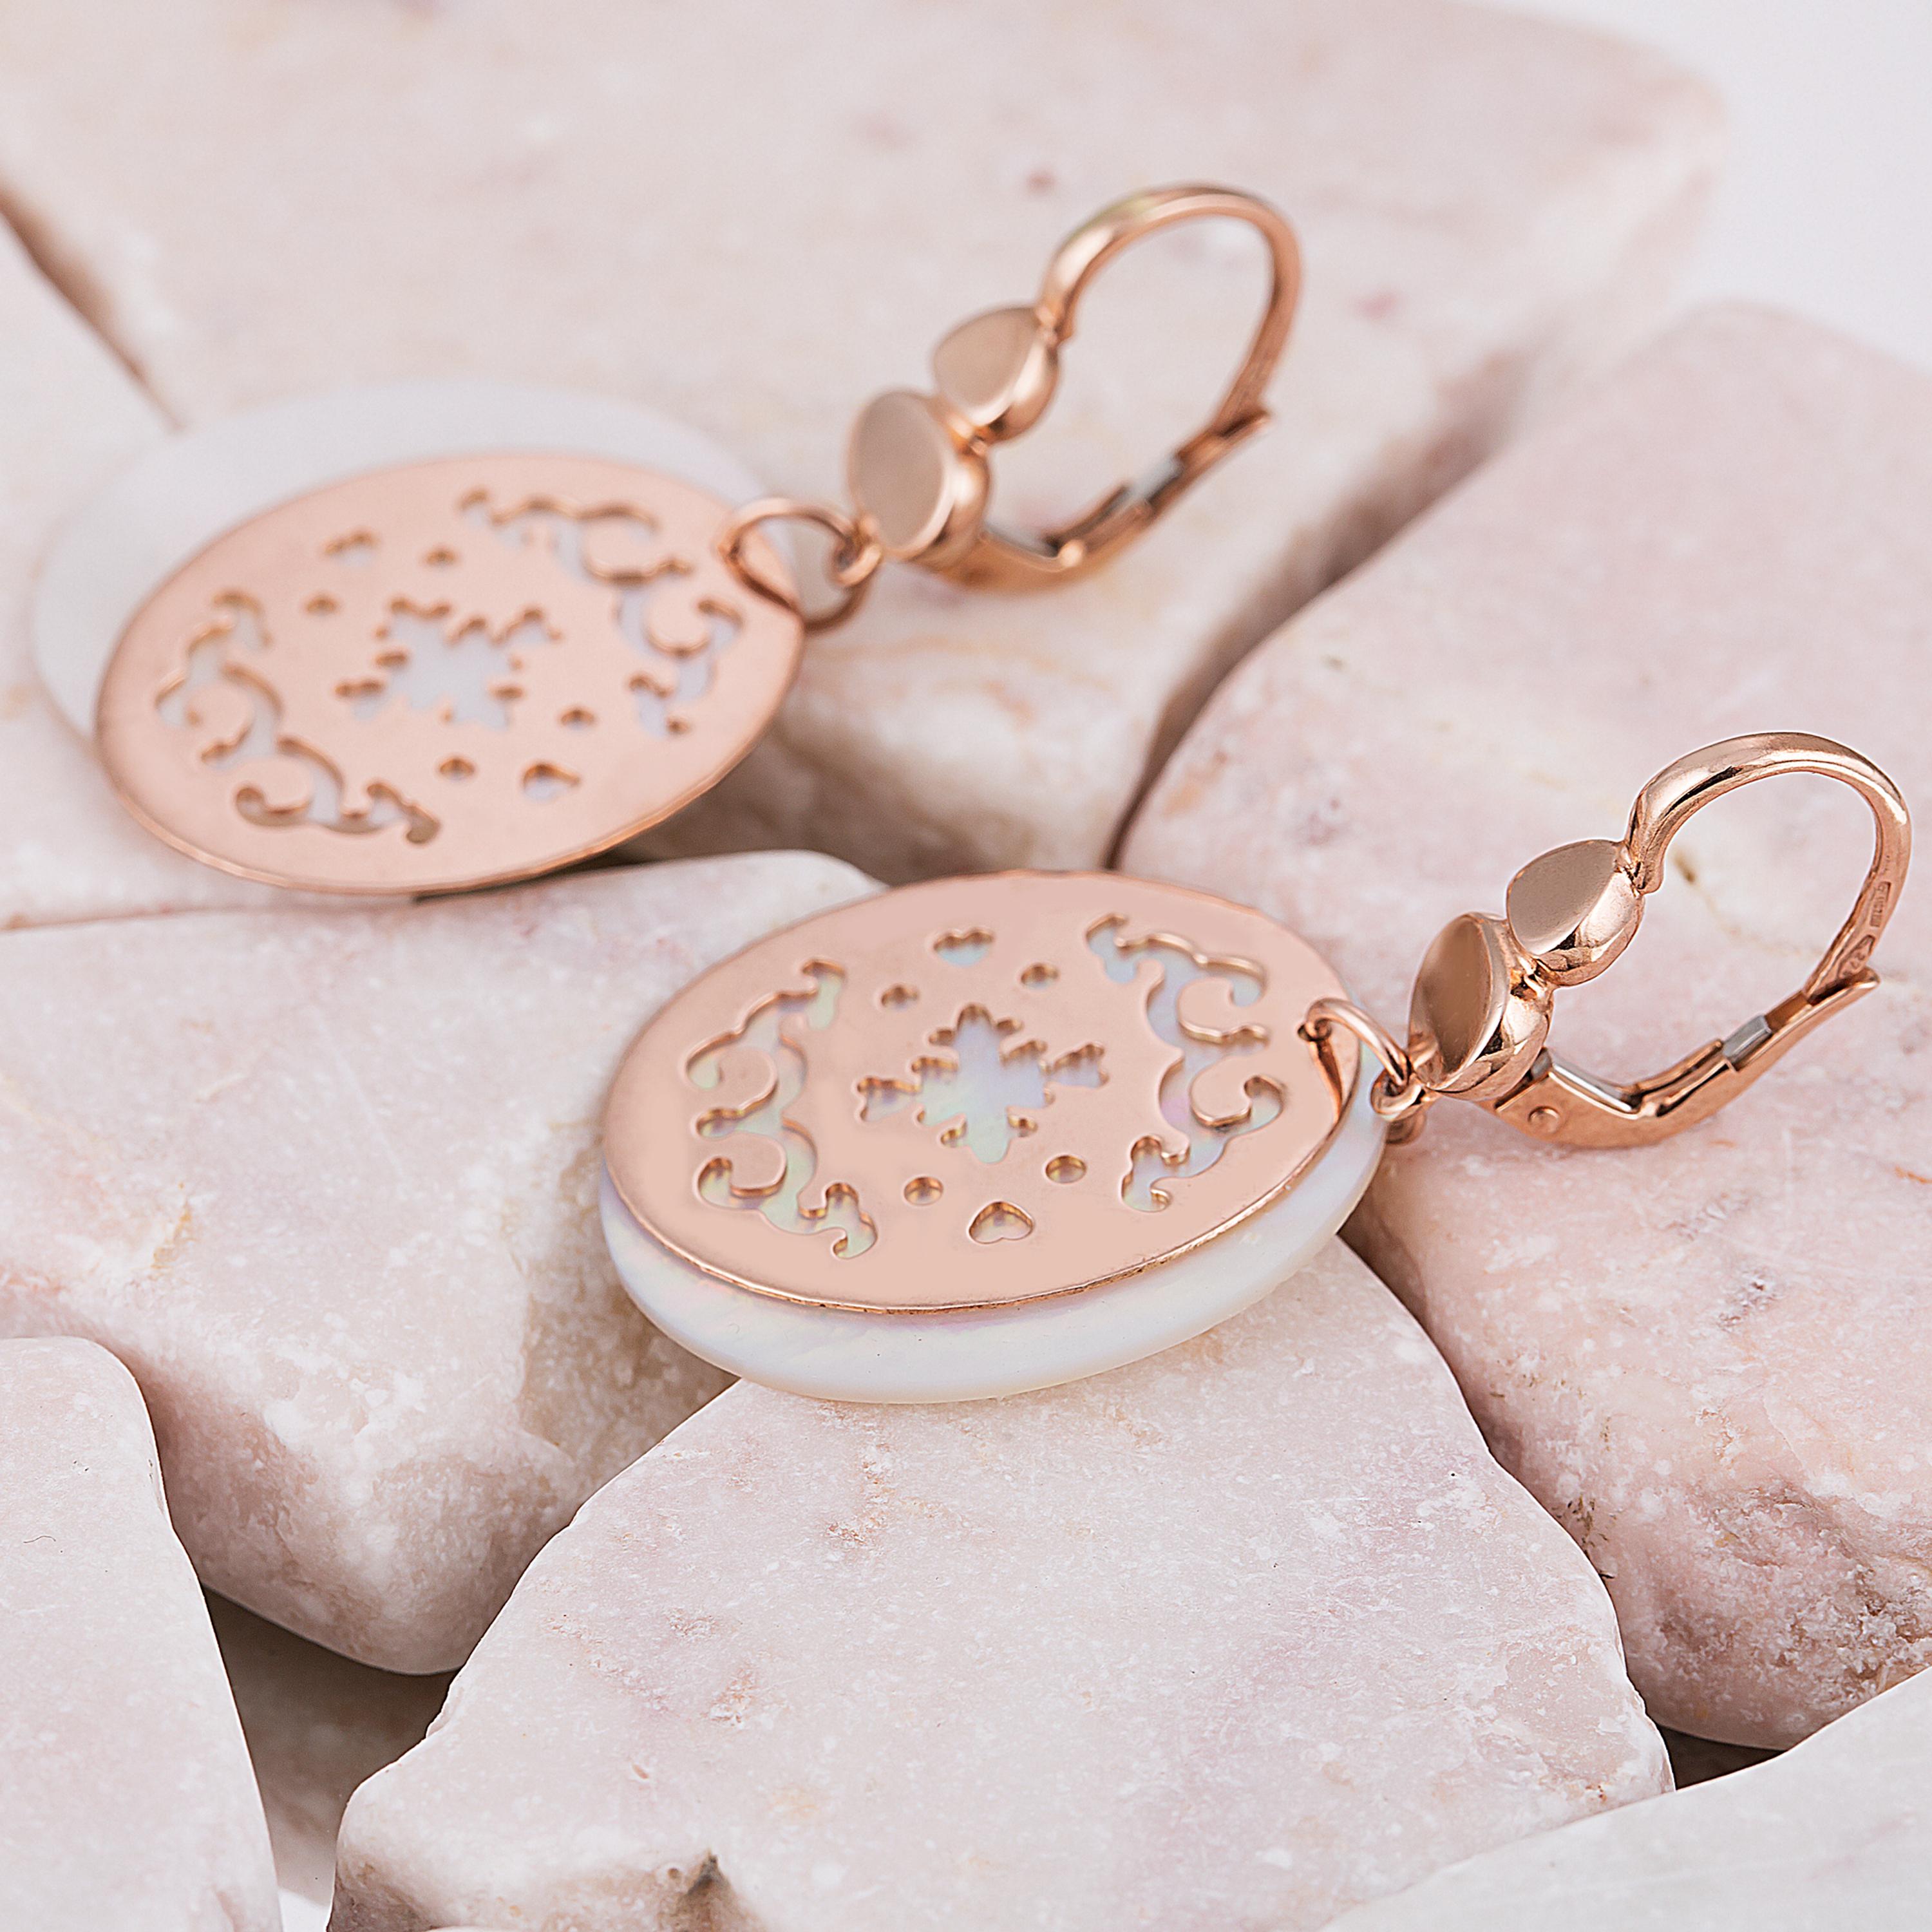 Stunning Drop Earrings
The earrings are 18K Rose Gold
Oval Mother of Pearl Discs
The earrings measure 1.5